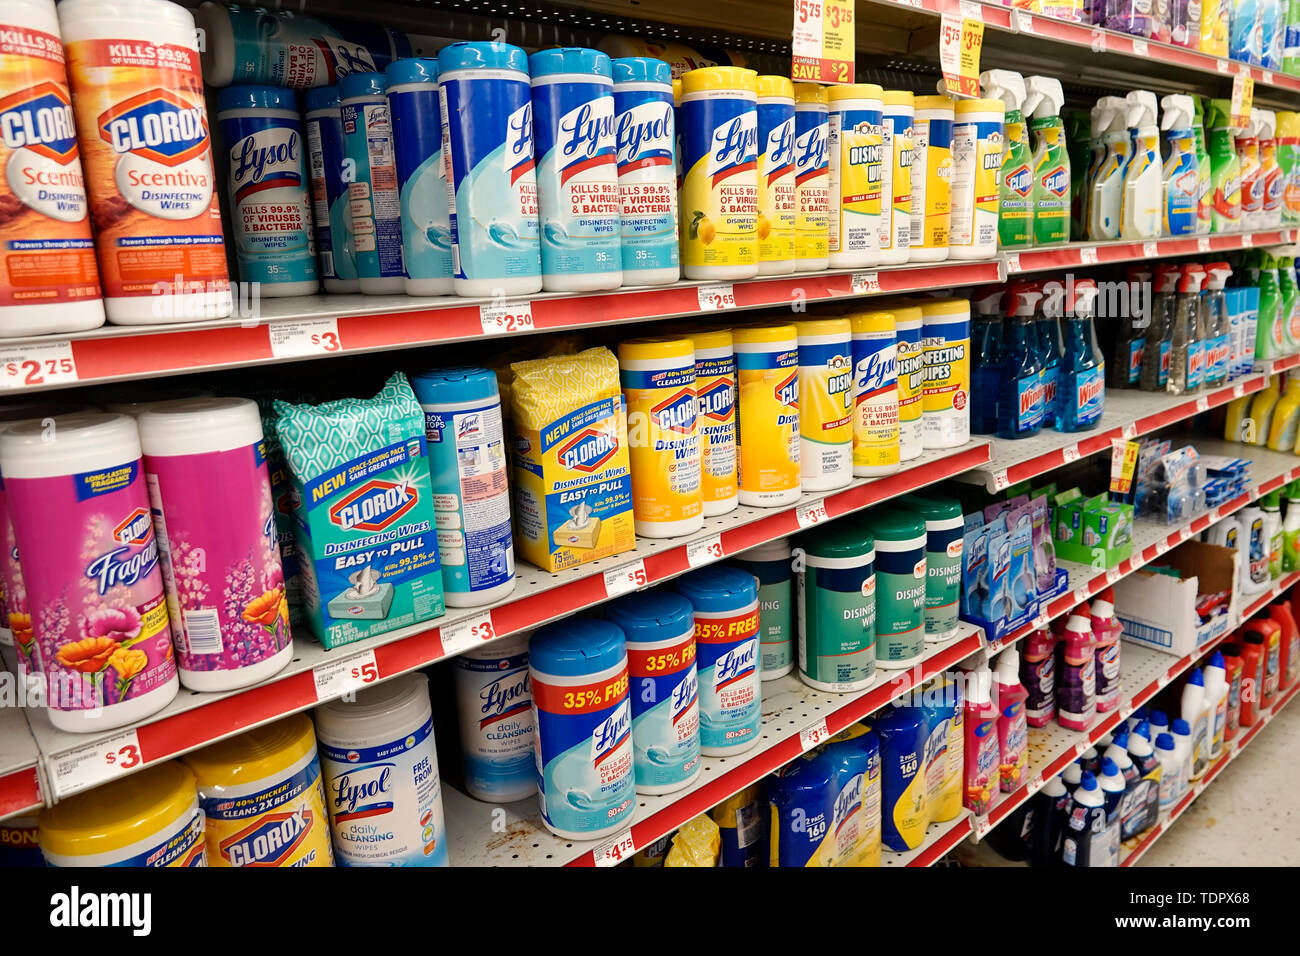 Miami Beach Florida,Family Dollar Store,inside interior,display sale,cleaning products,Clorox,Lysol,anti-bacterial wipes,cleaners,shelf shelves,FL1901 Stock Photo